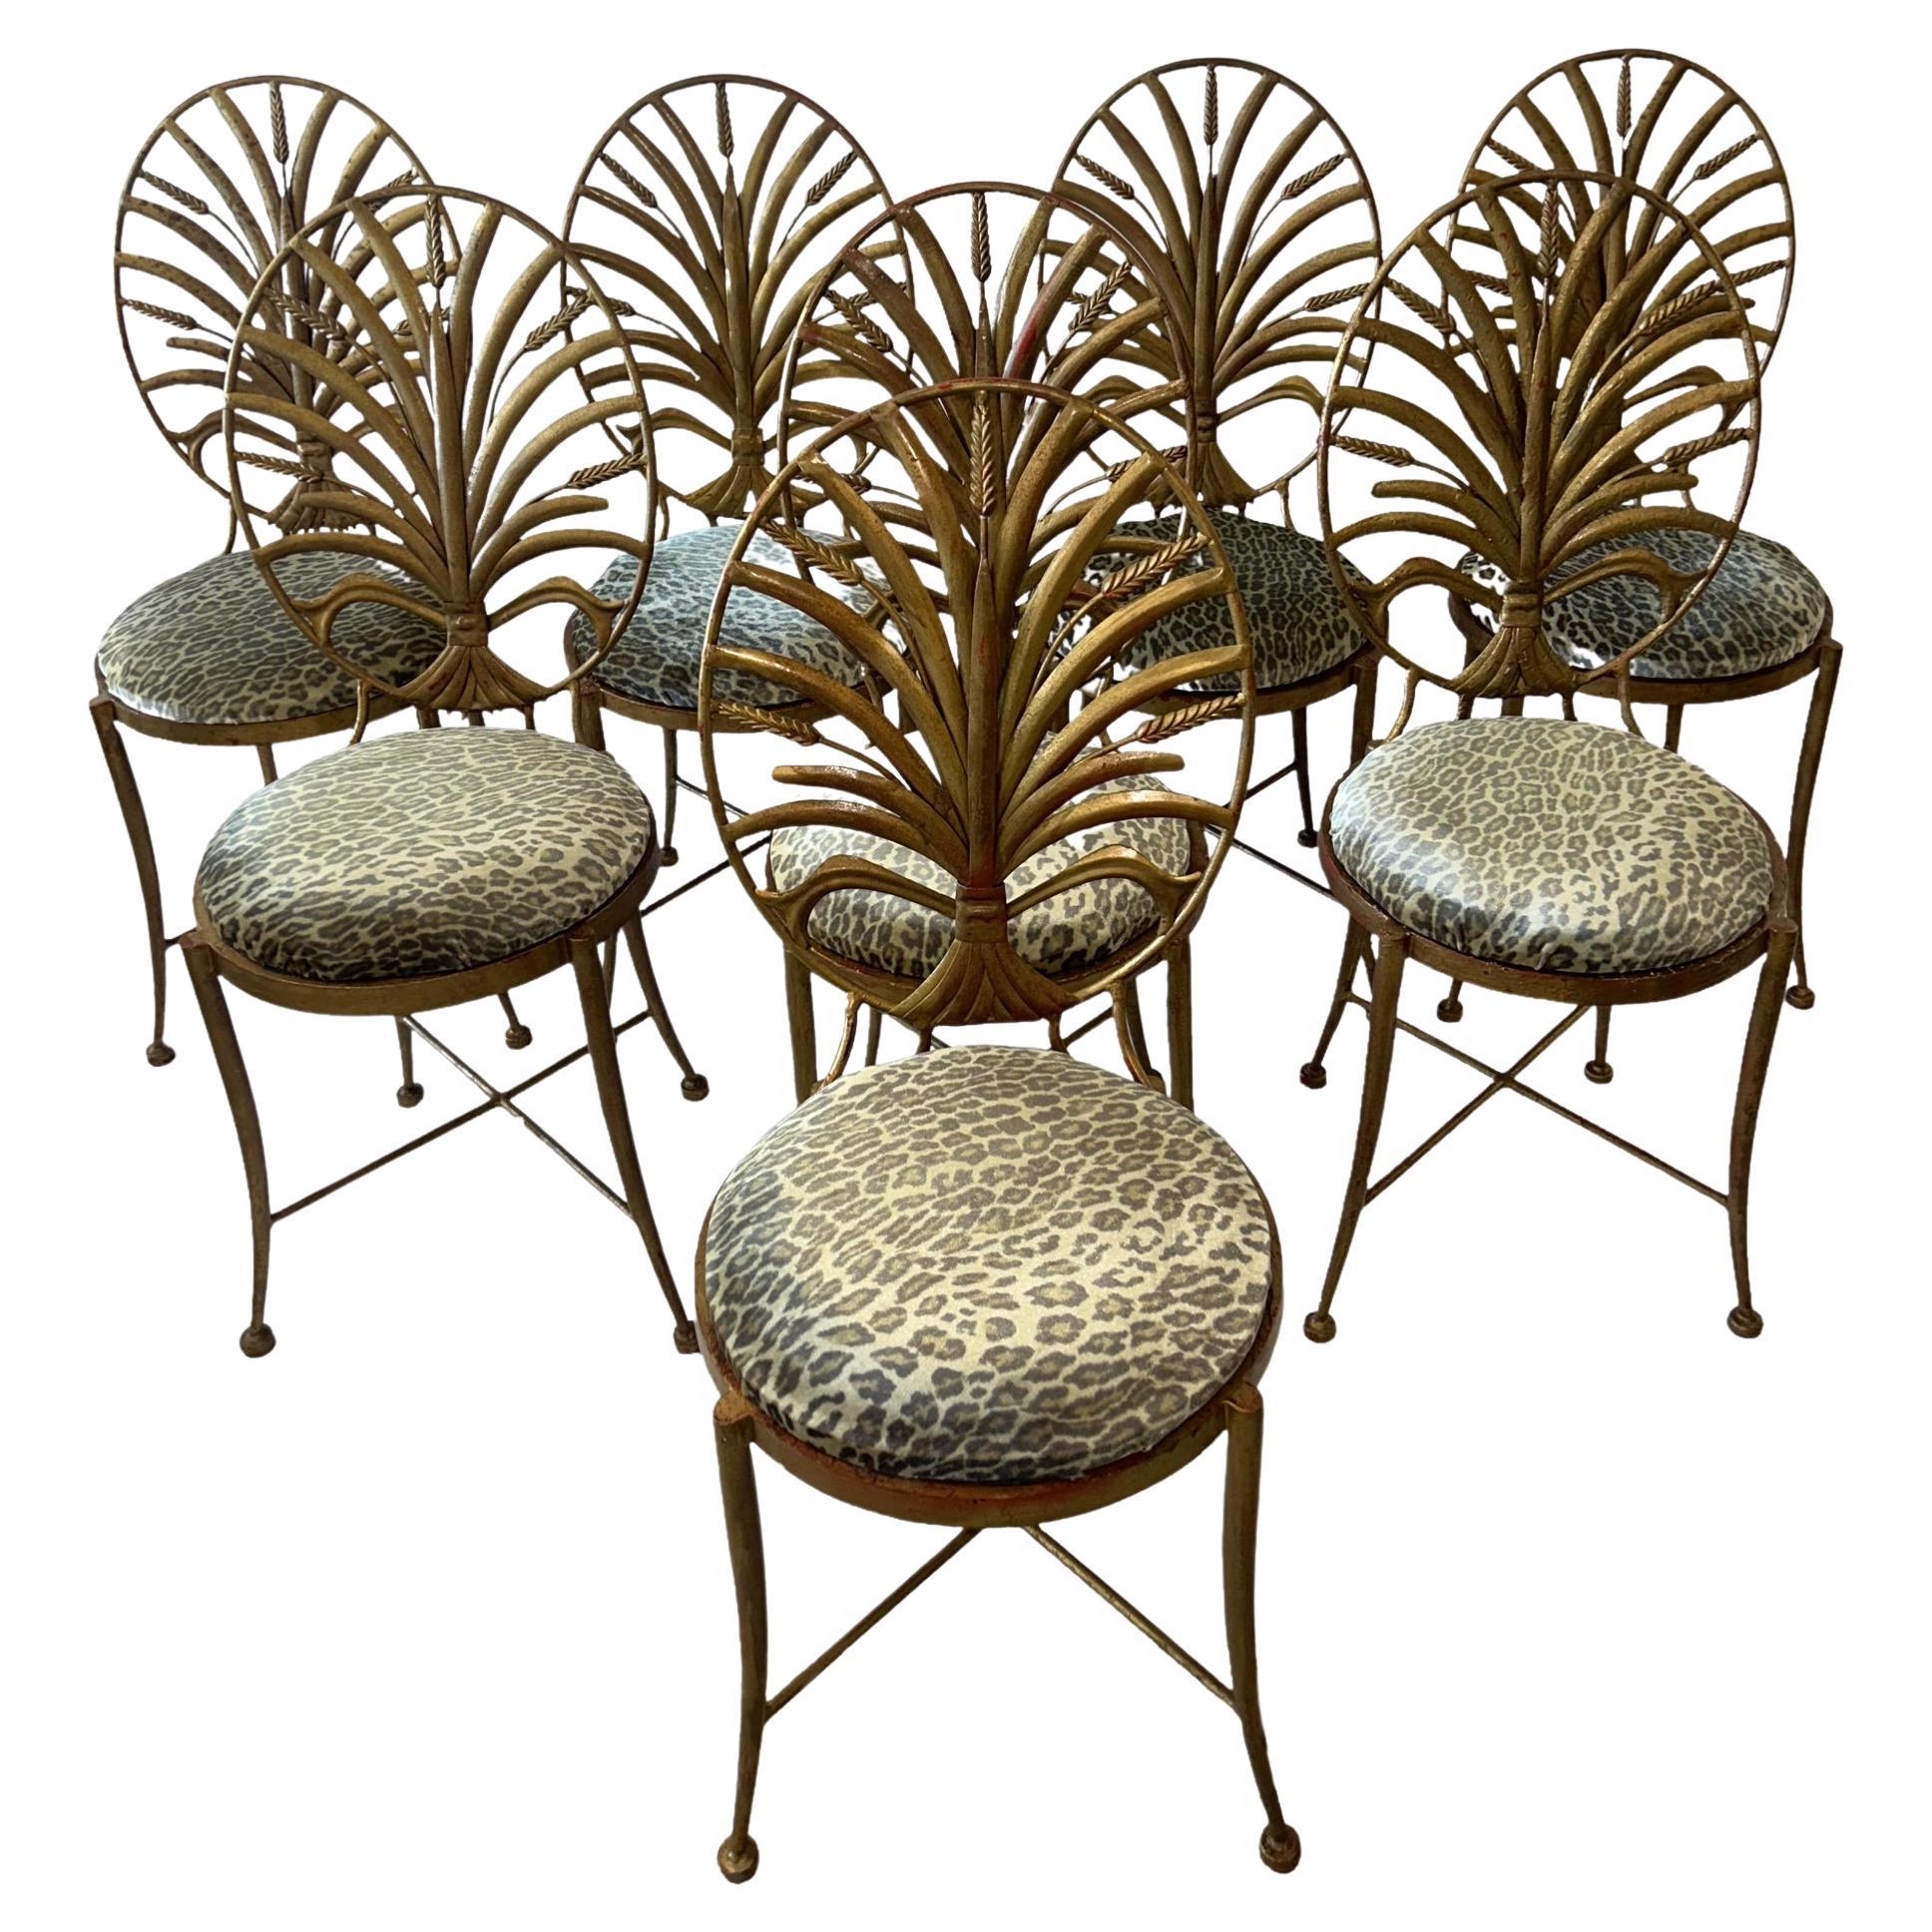 S Salvadori "Wheat Ear" Set of 8 Chairs For Sale